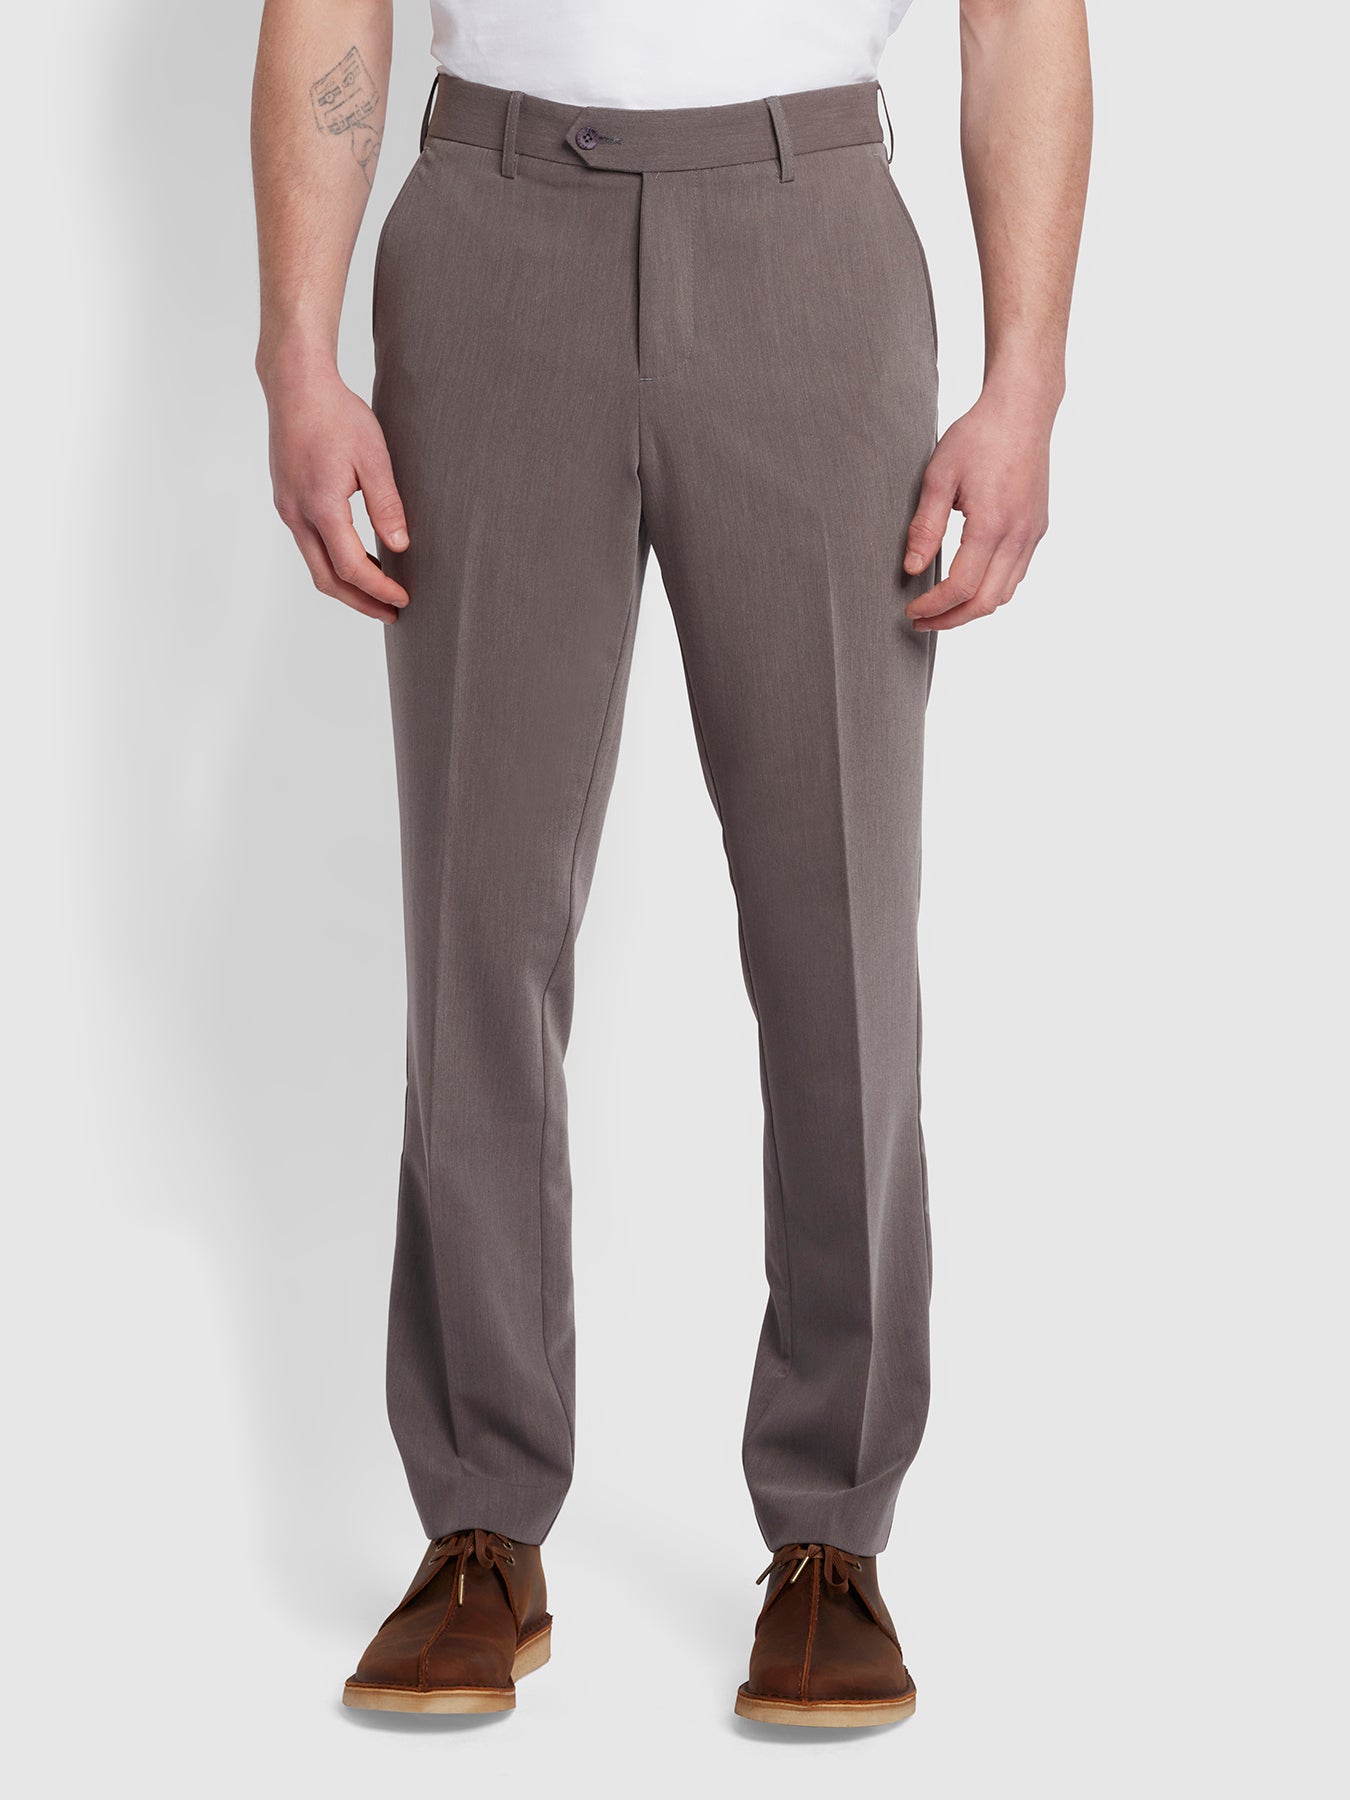 View Roachman 4 Way Stretch Trousers In Grey information